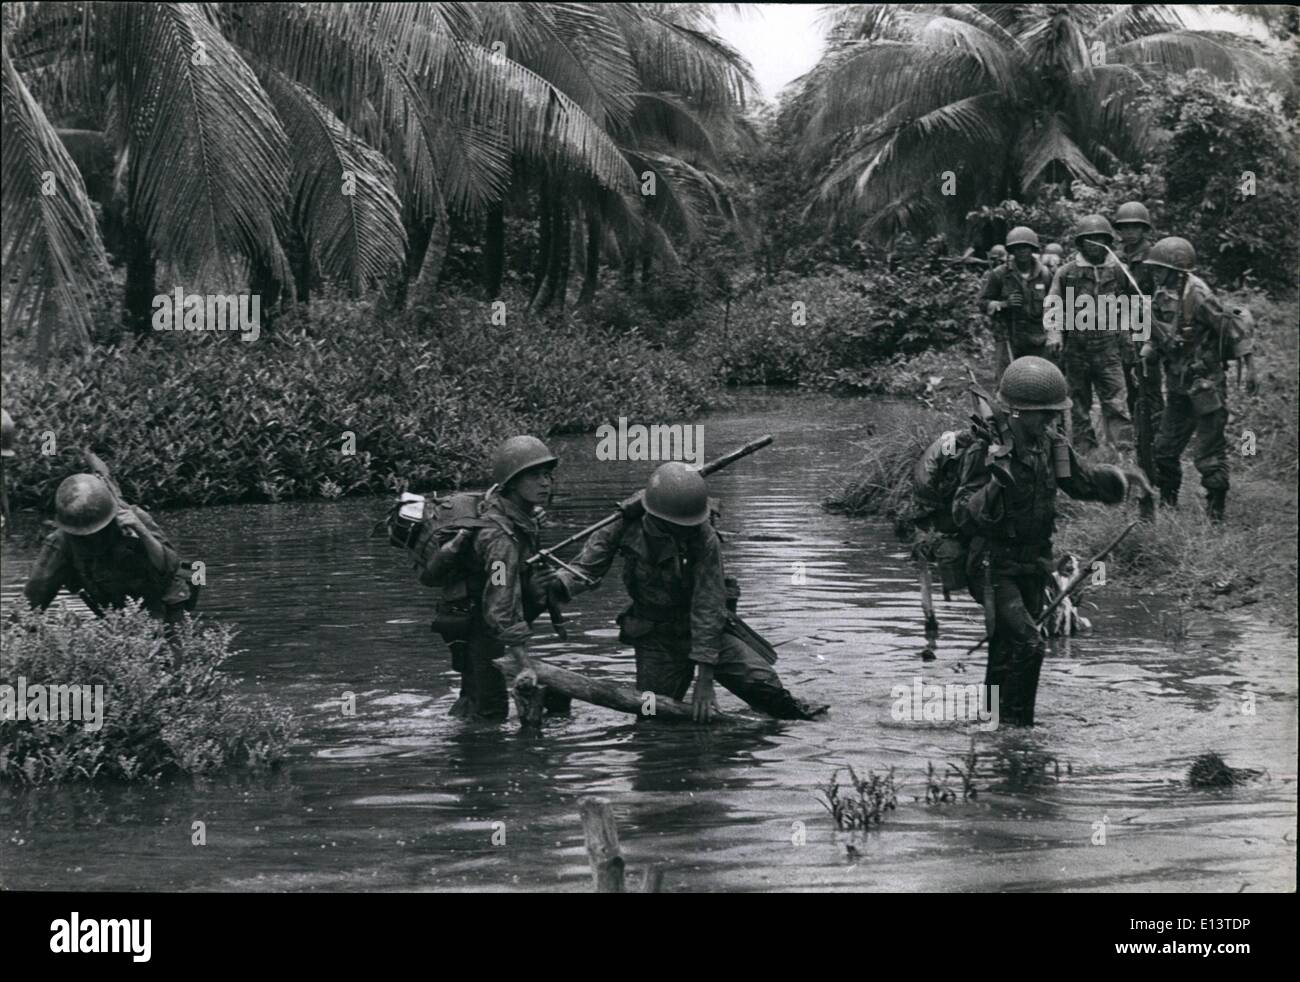 Mar. 27, 2012 - Vietnamese troops wade through mangrove swamps as they seek out Viet Cong positions in Hamau Peninsula. Stock Photo